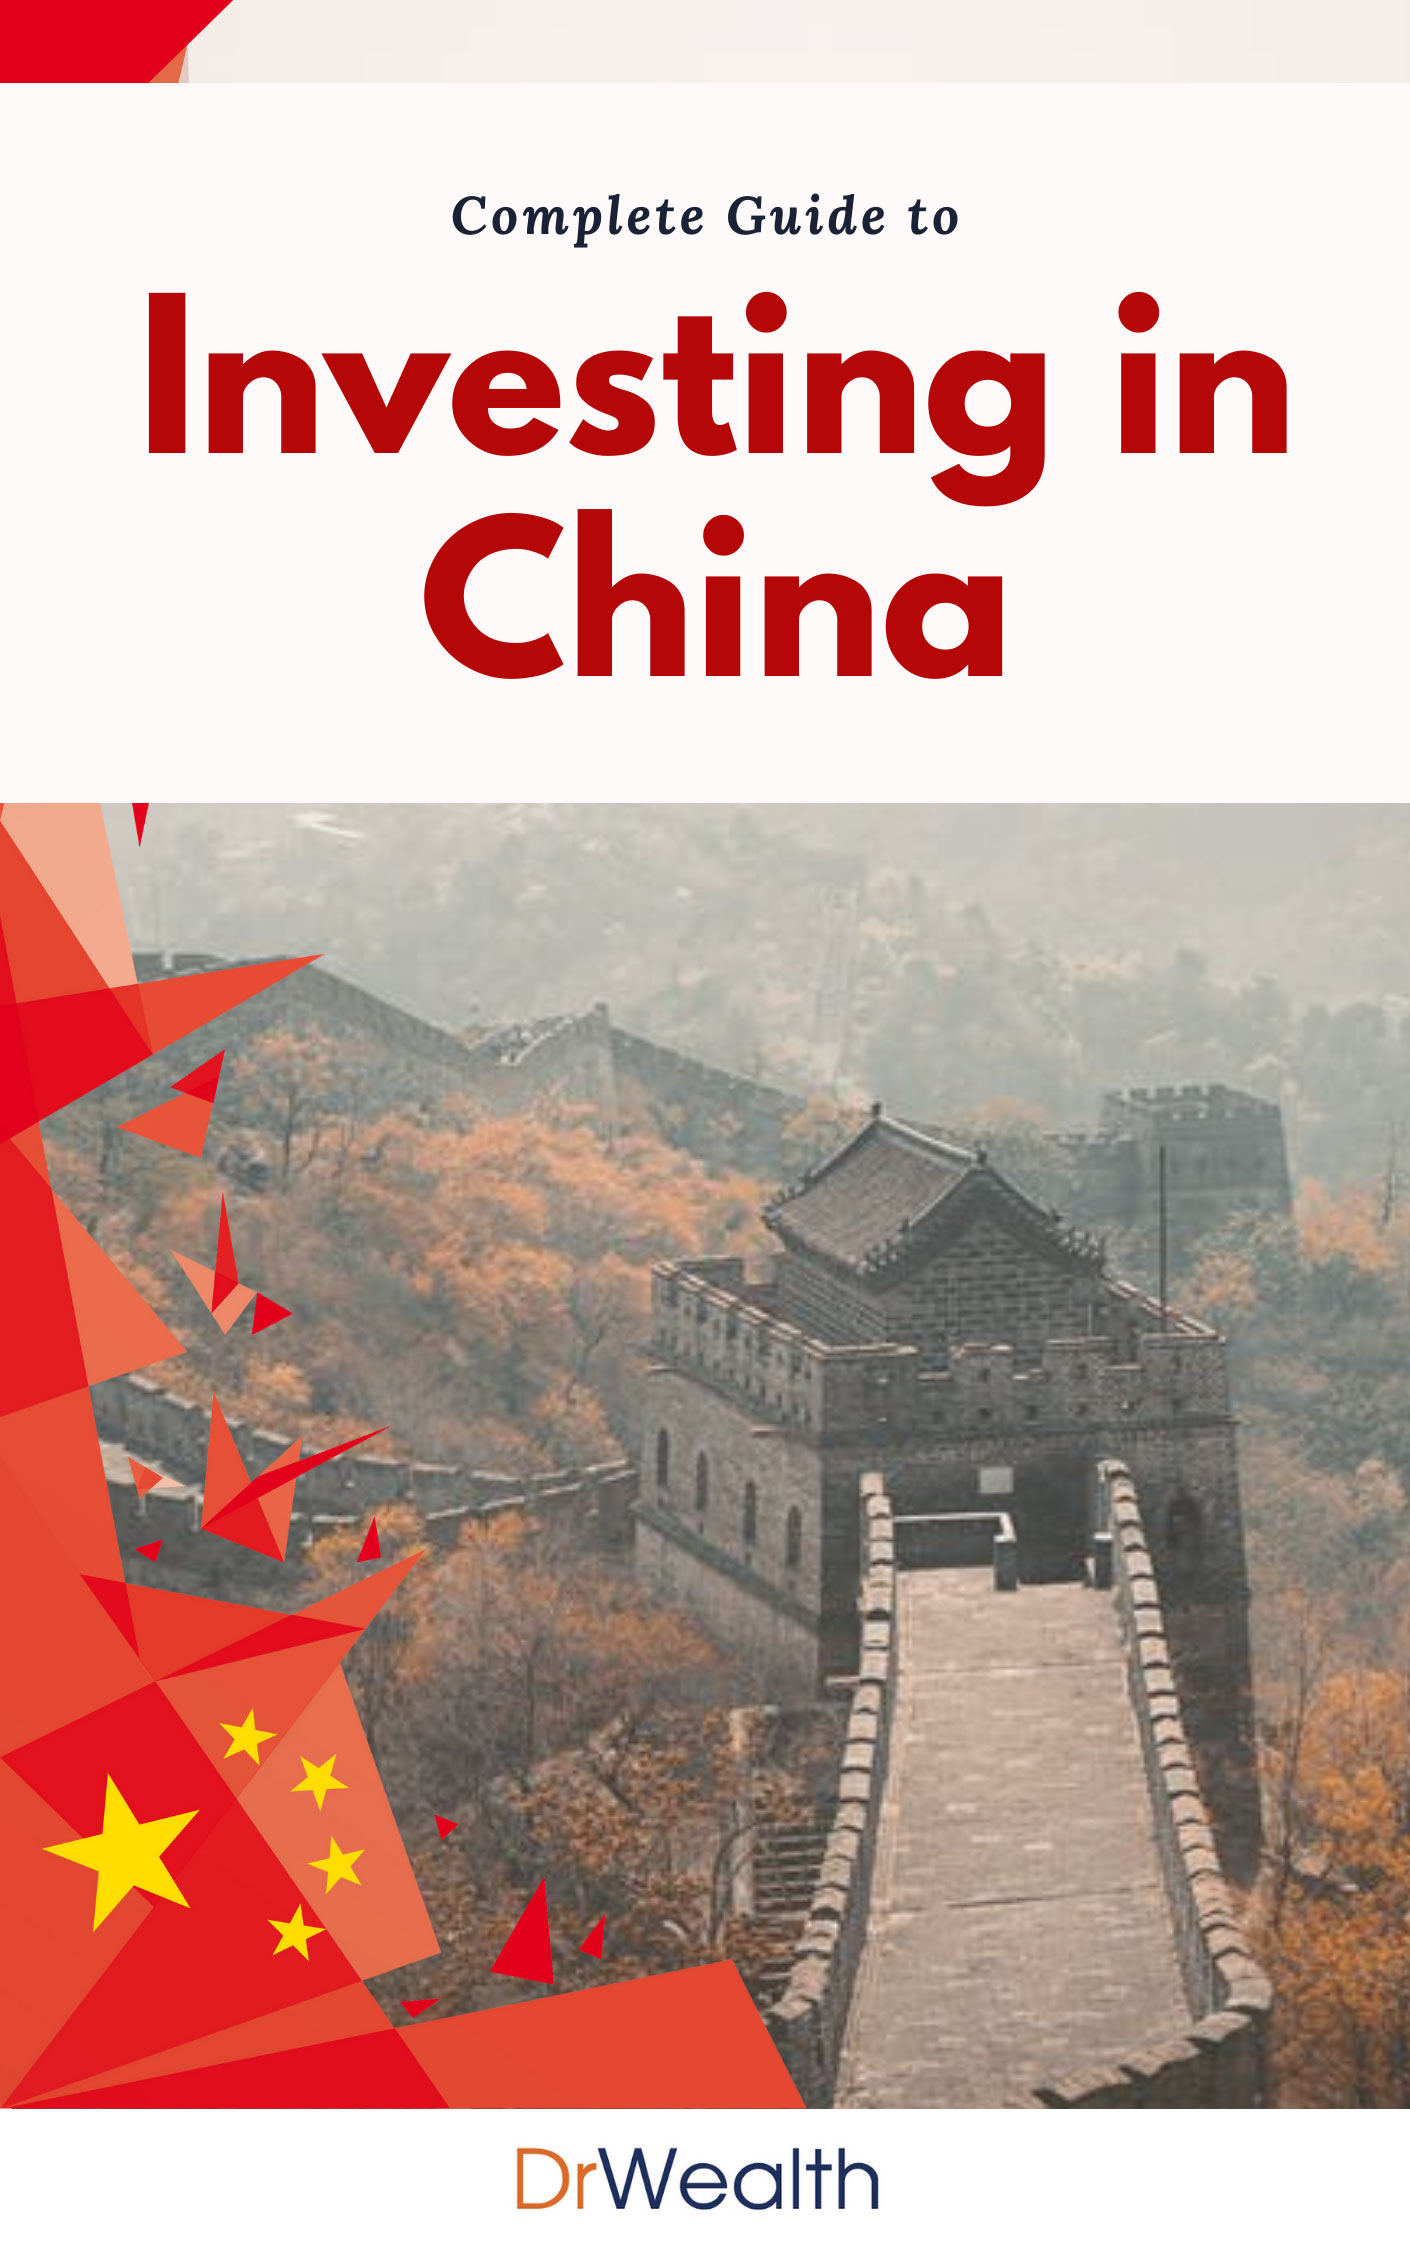 Complete Guide to investing in China Dr Wealth